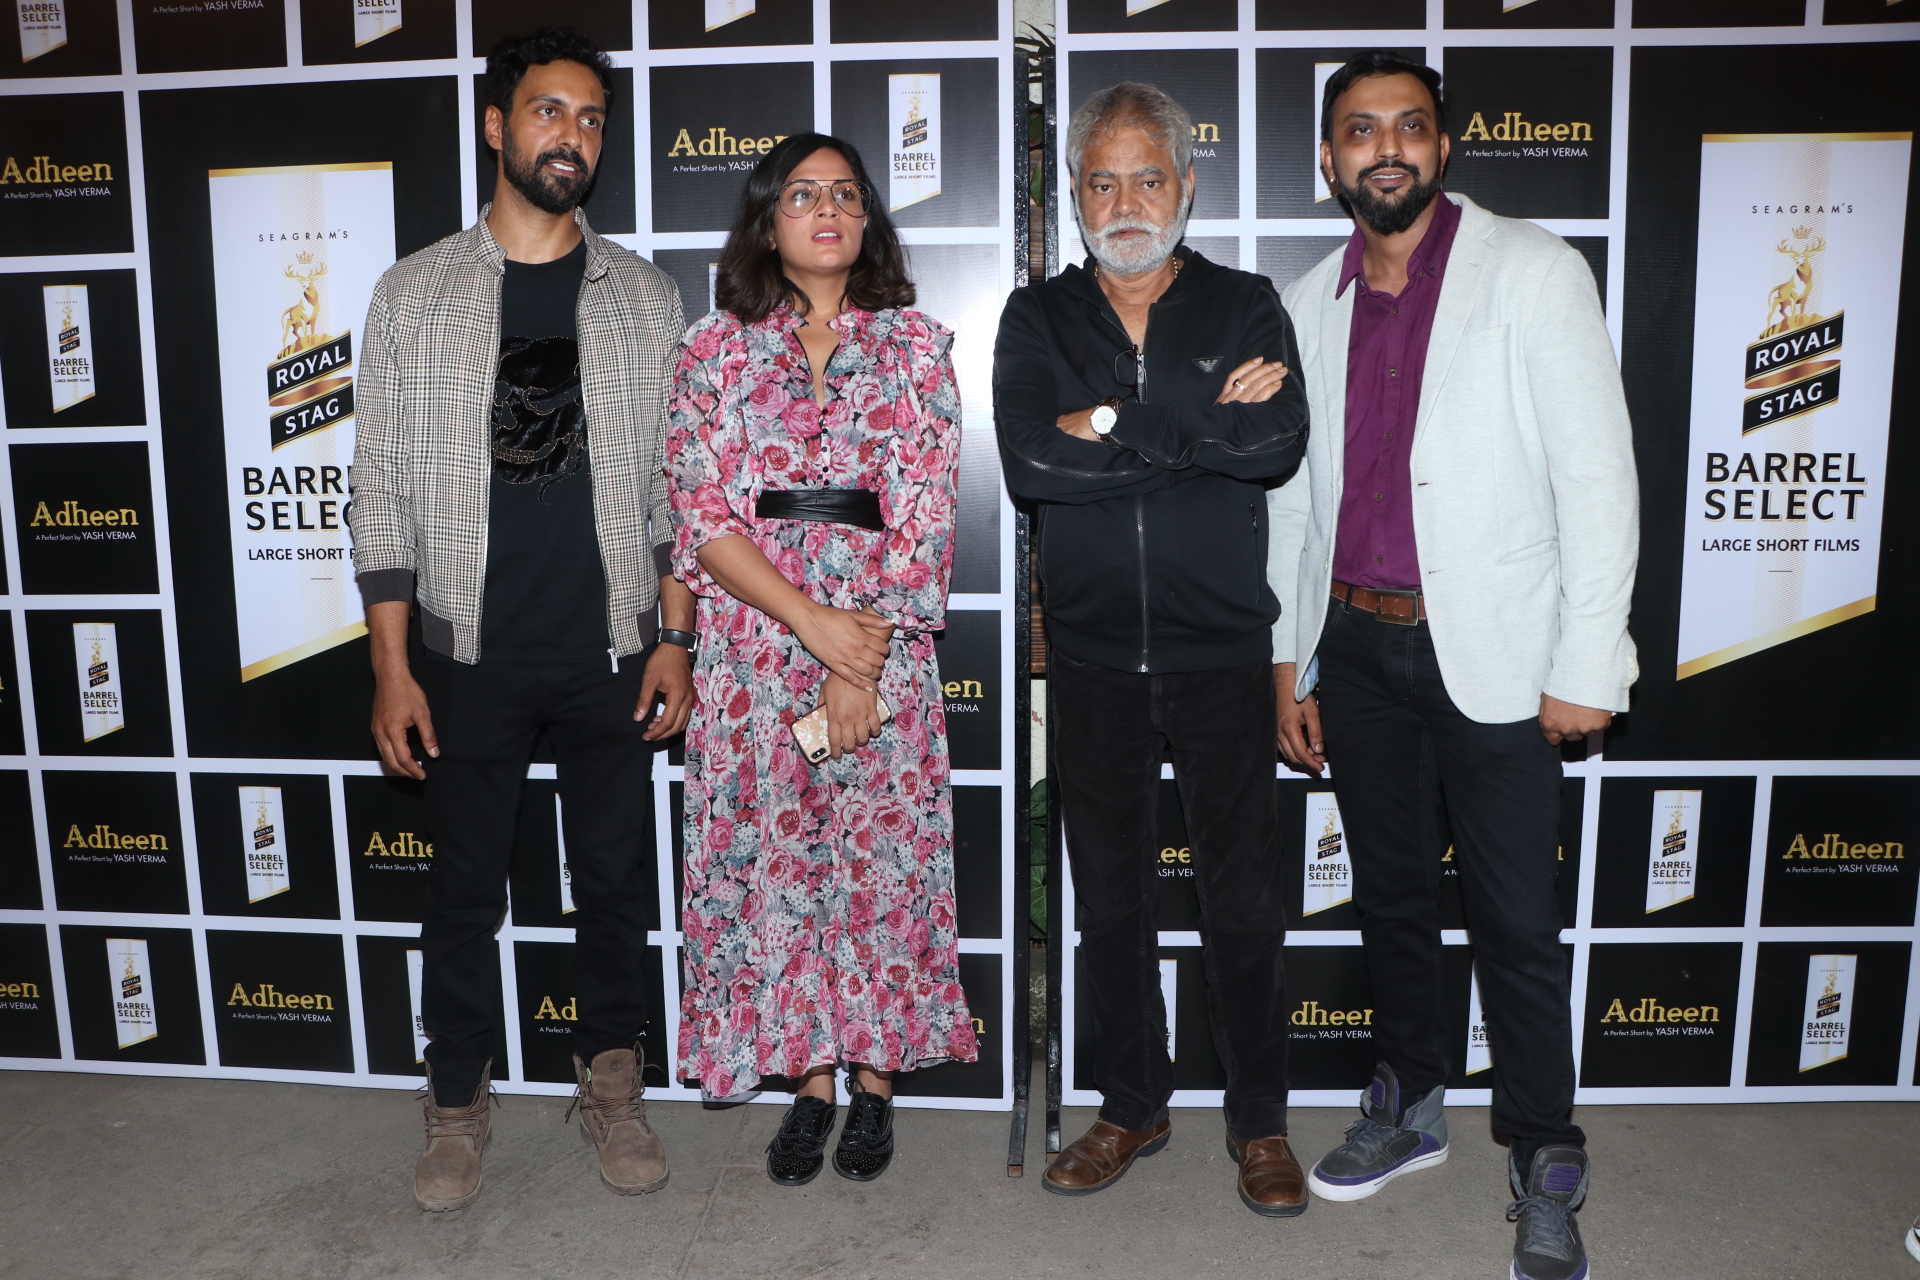 Royal Stag Barrel select LArge Short film premiers movie Adheen at Sunny Sound -Photo By Sachin Murdeshwar GPN